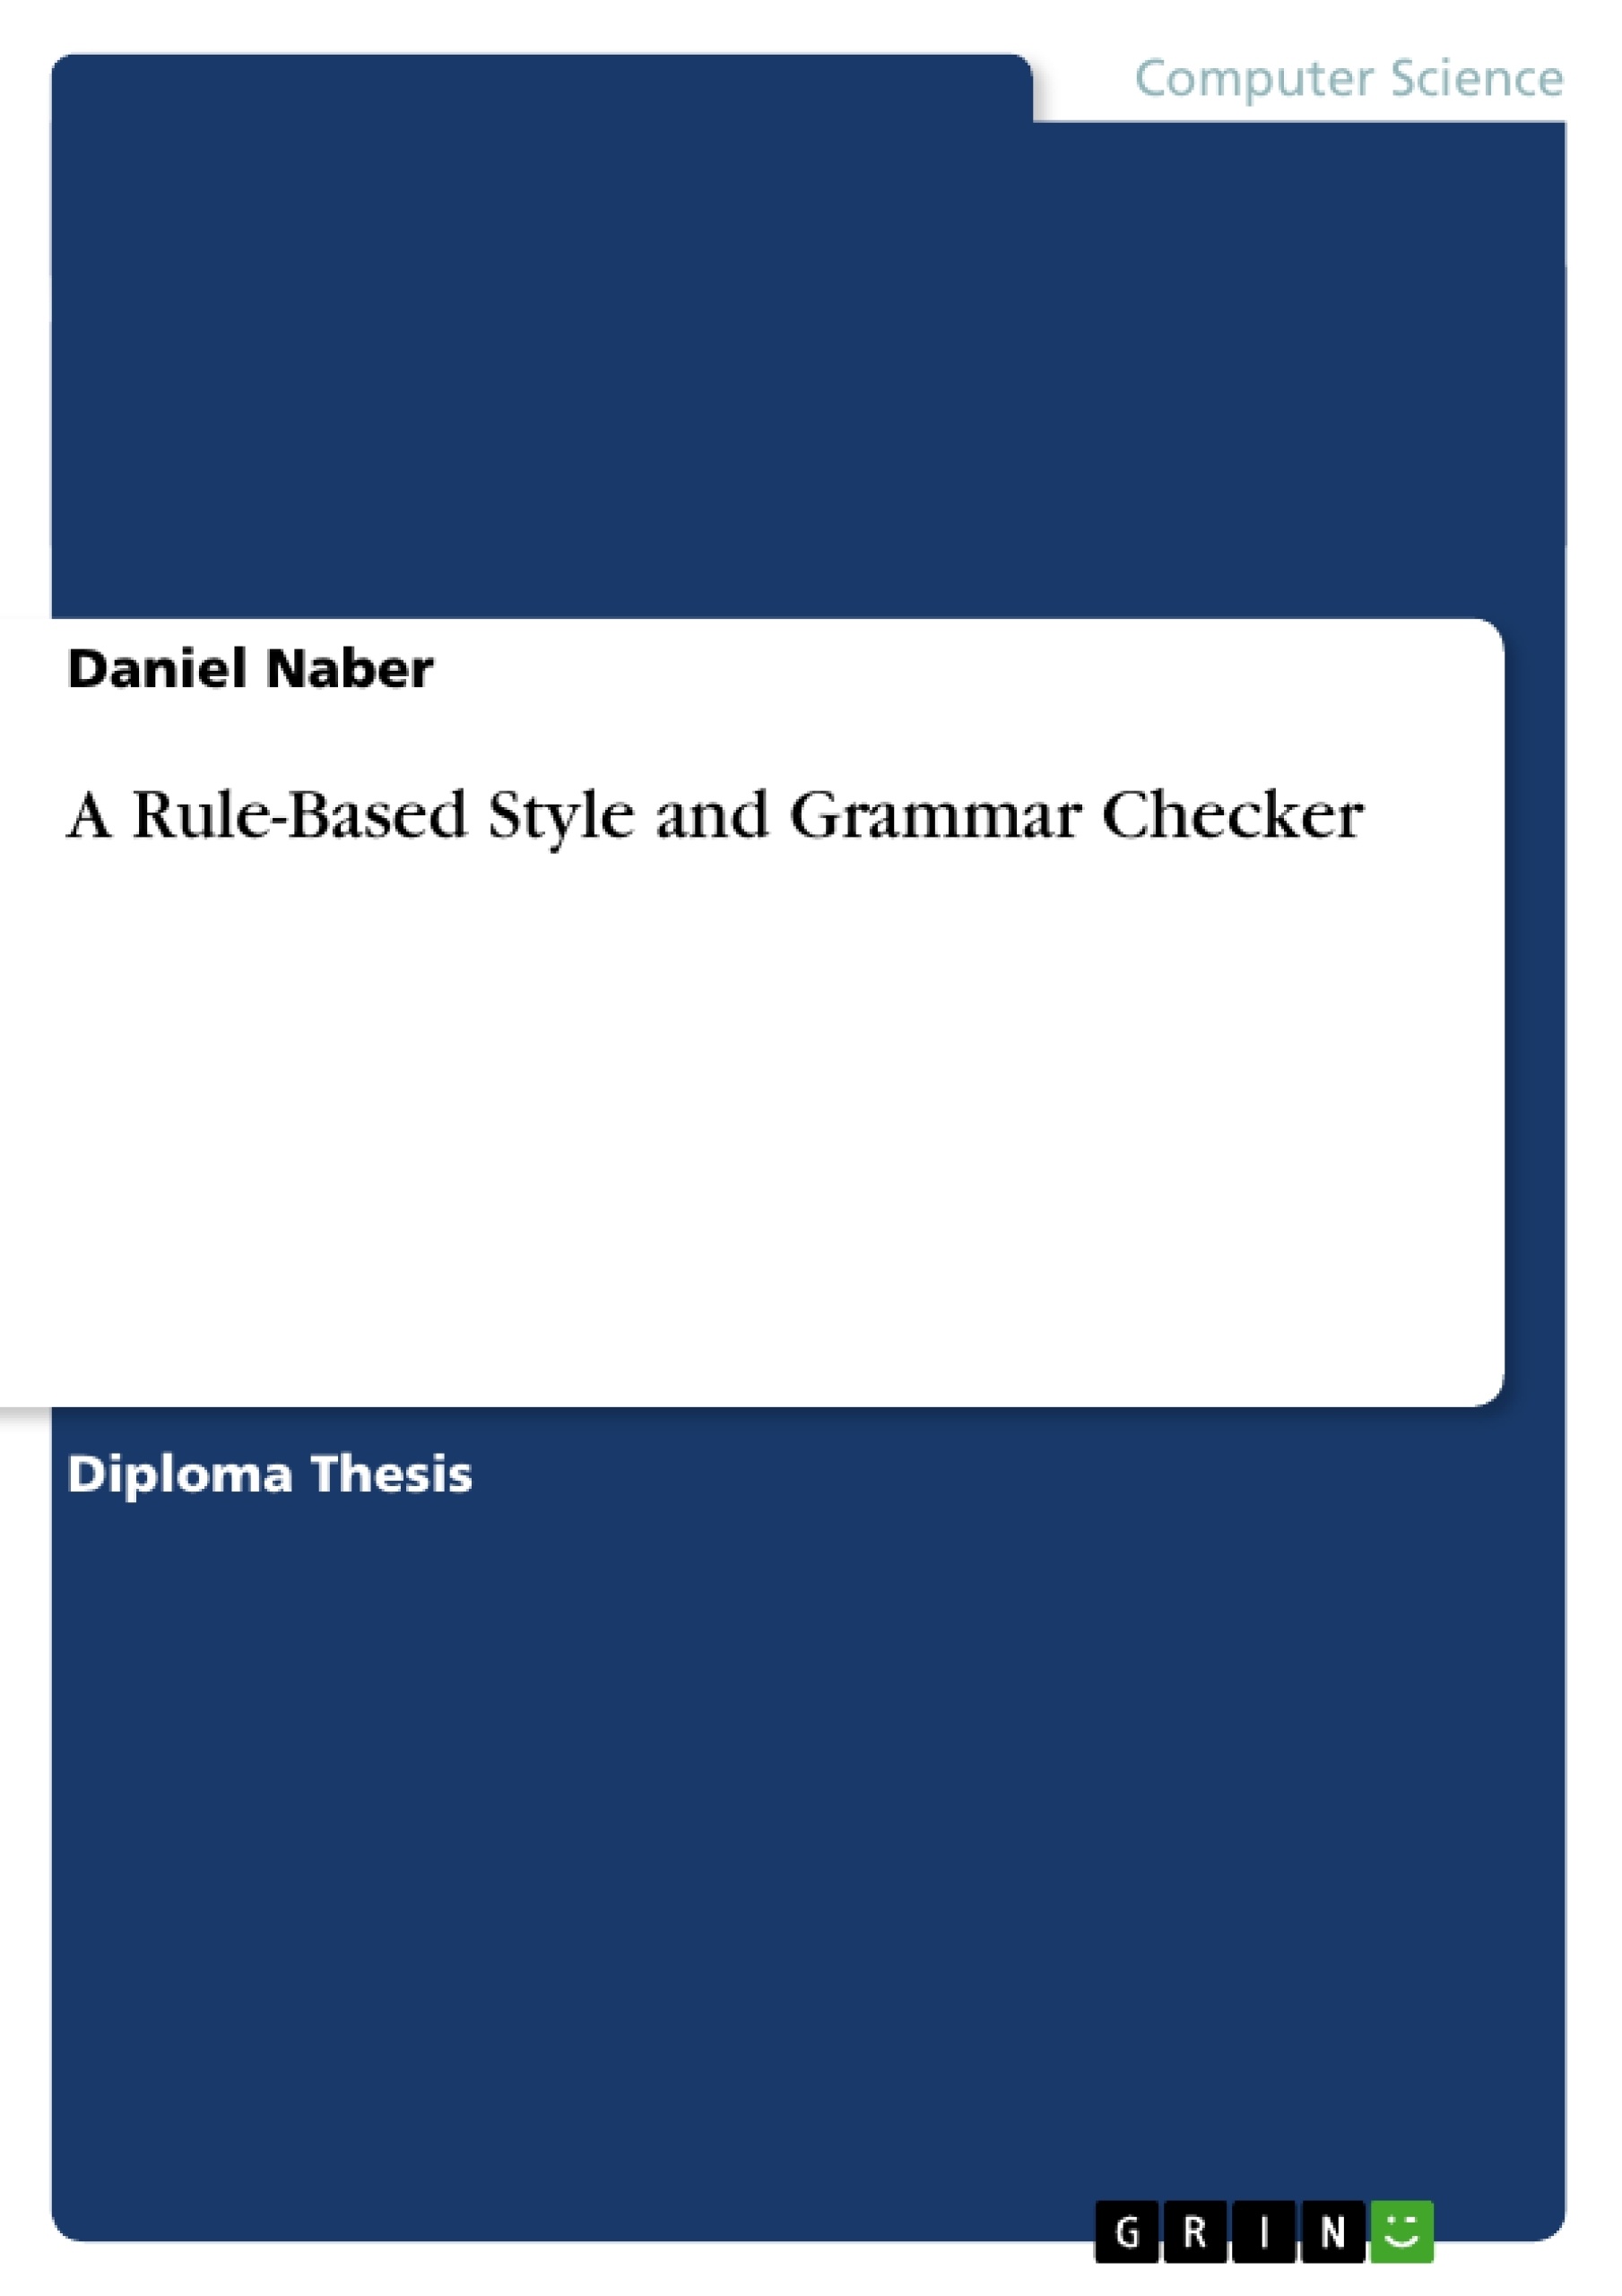 Title: A Rule-Based Style and Grammar Checker